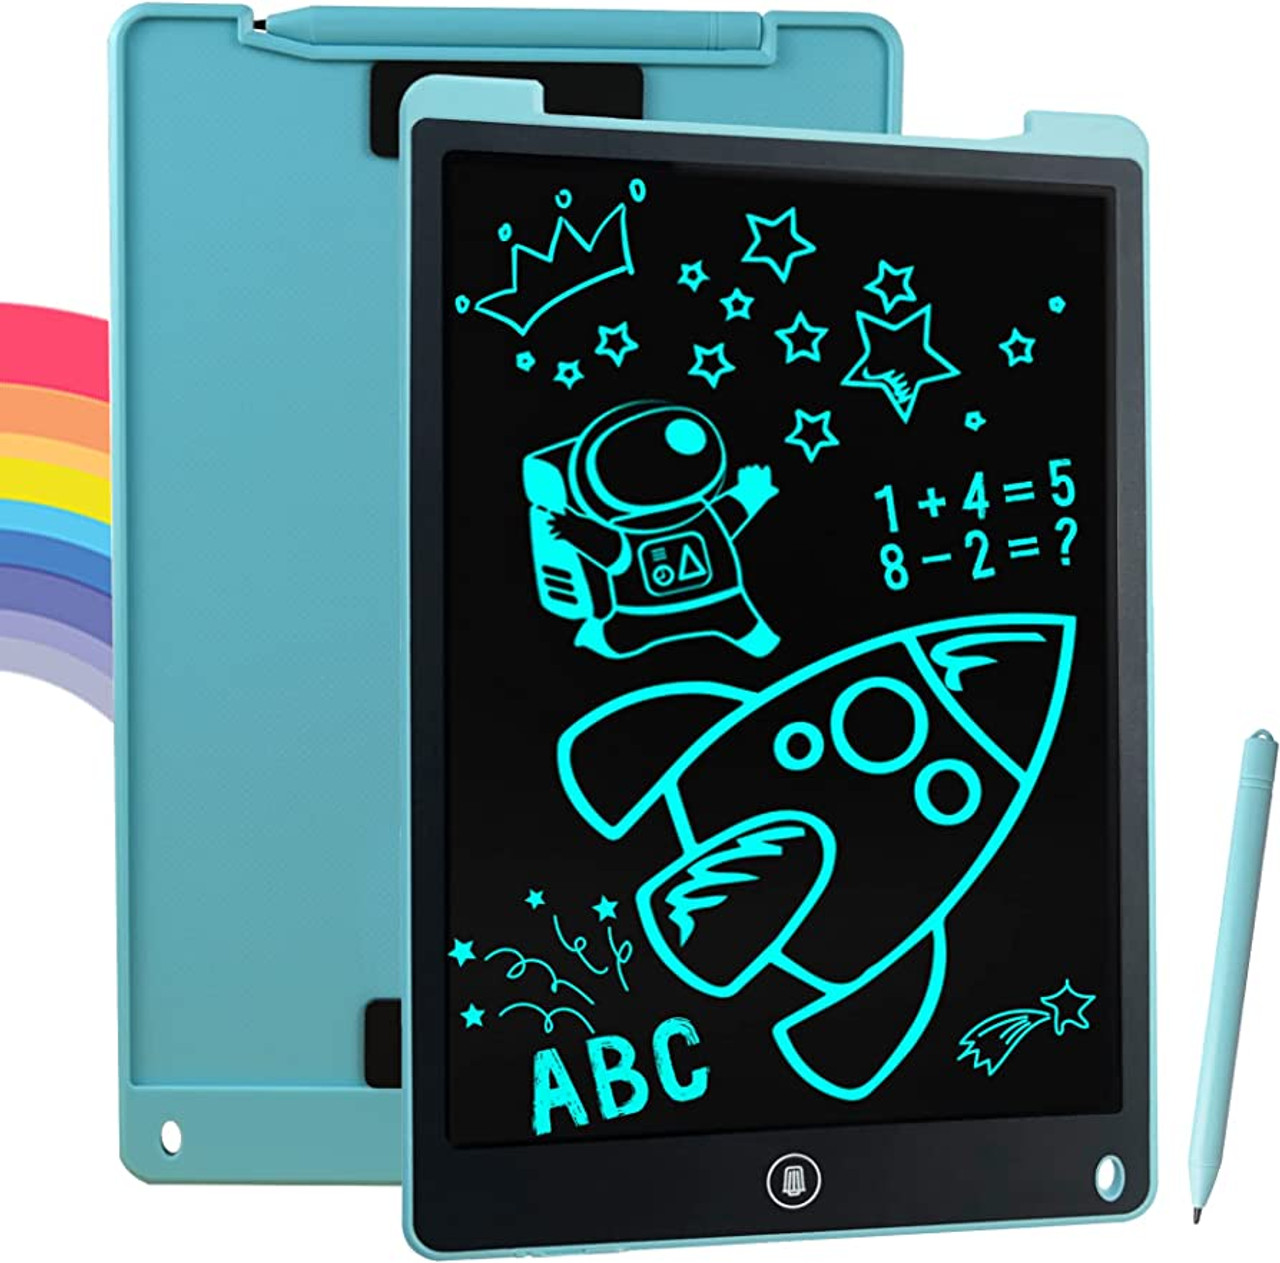 Generic Kids Drawing Pads Light Up Doodle Boards Colorful Writing Doodle Tablet 3D Magic Drawing Board with LED Light Glow in Dark Kids Educational